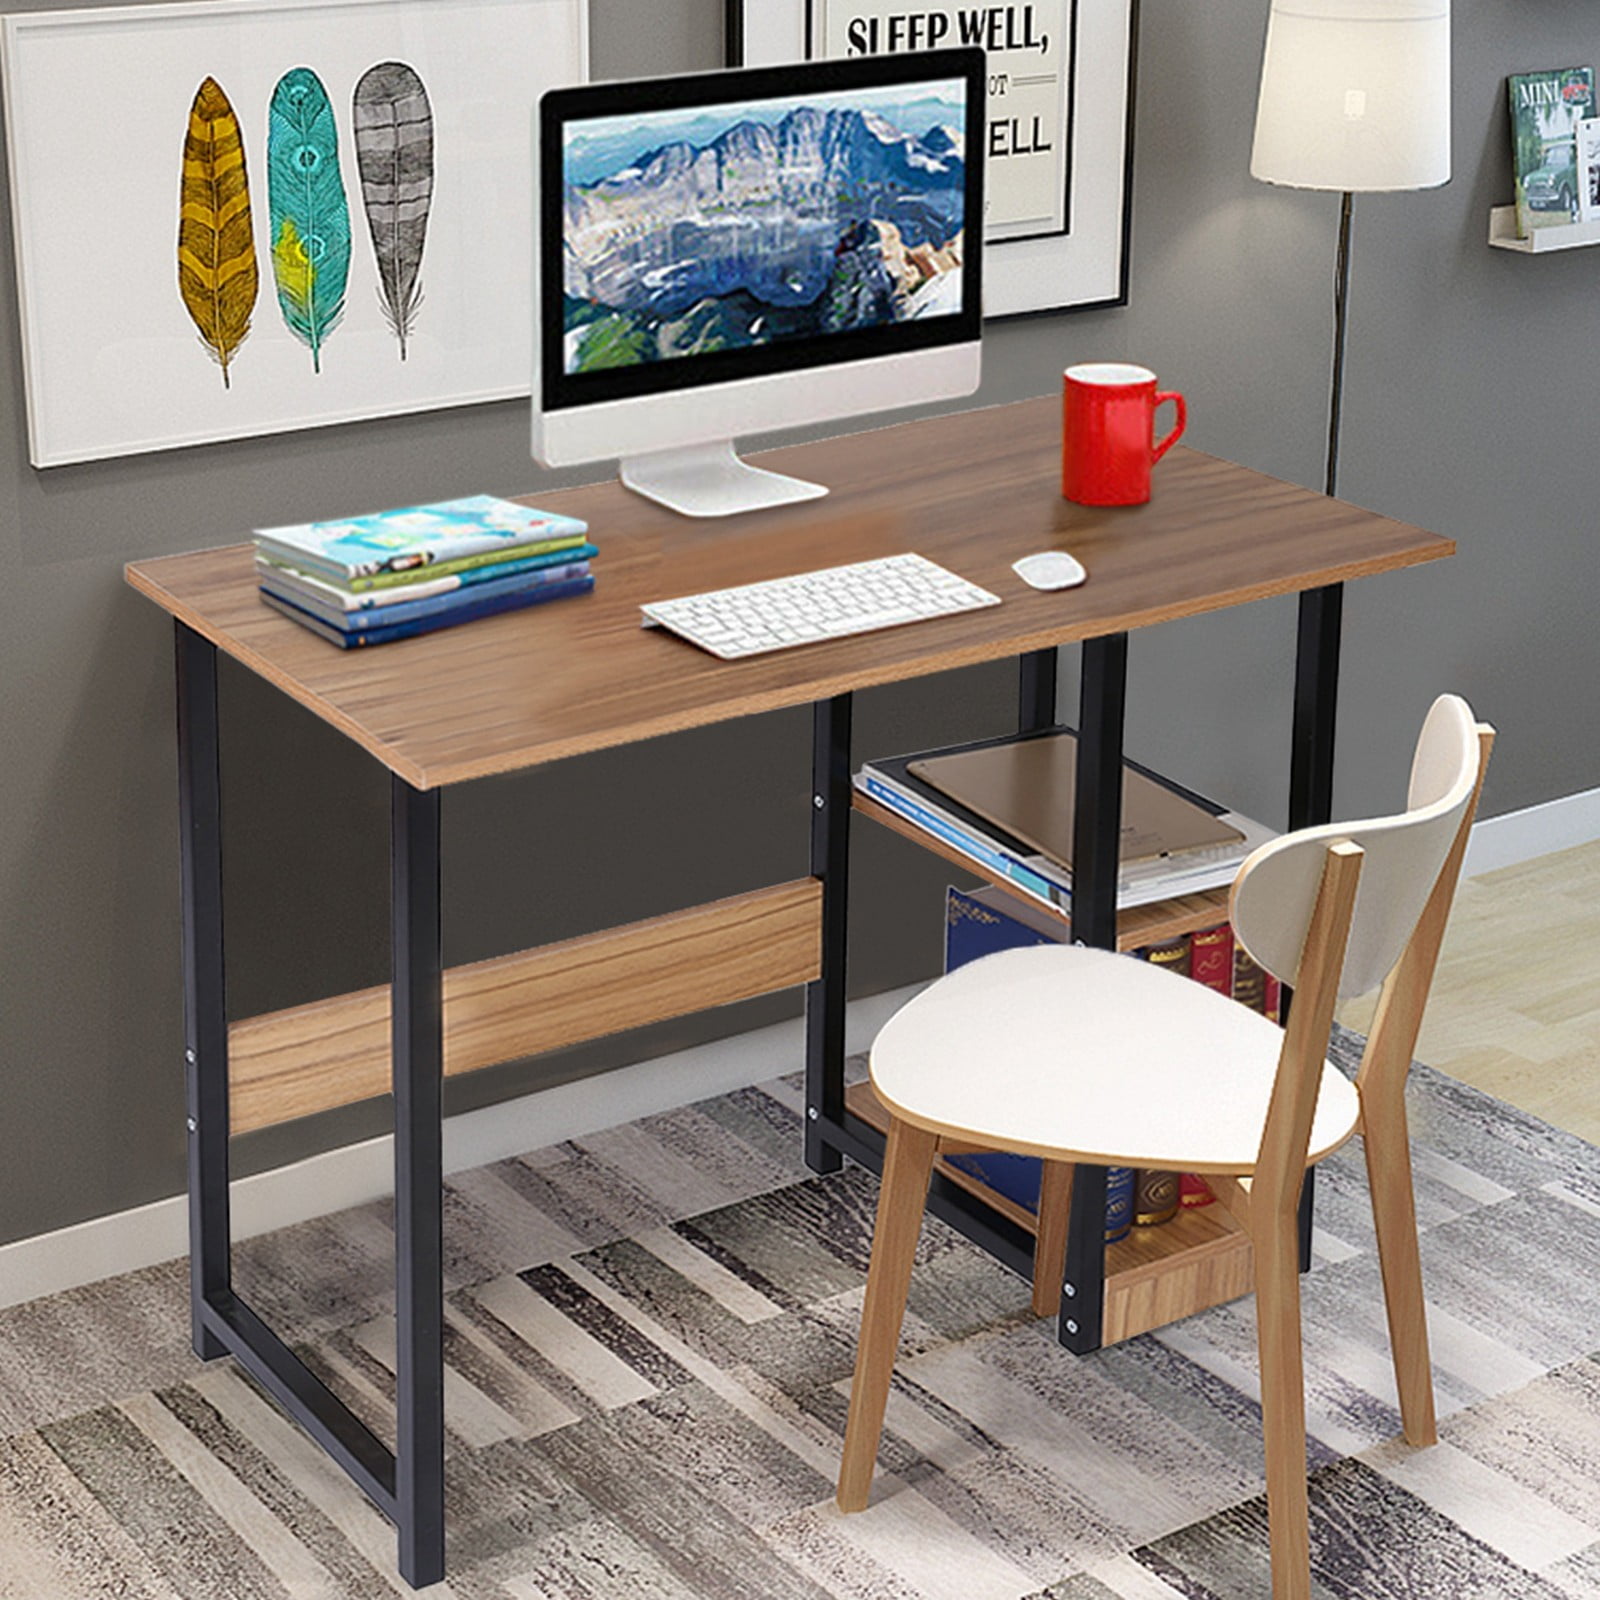 Details about   Computer Desk PC Laptop Table Study Workstation Writing Home Office Table New 